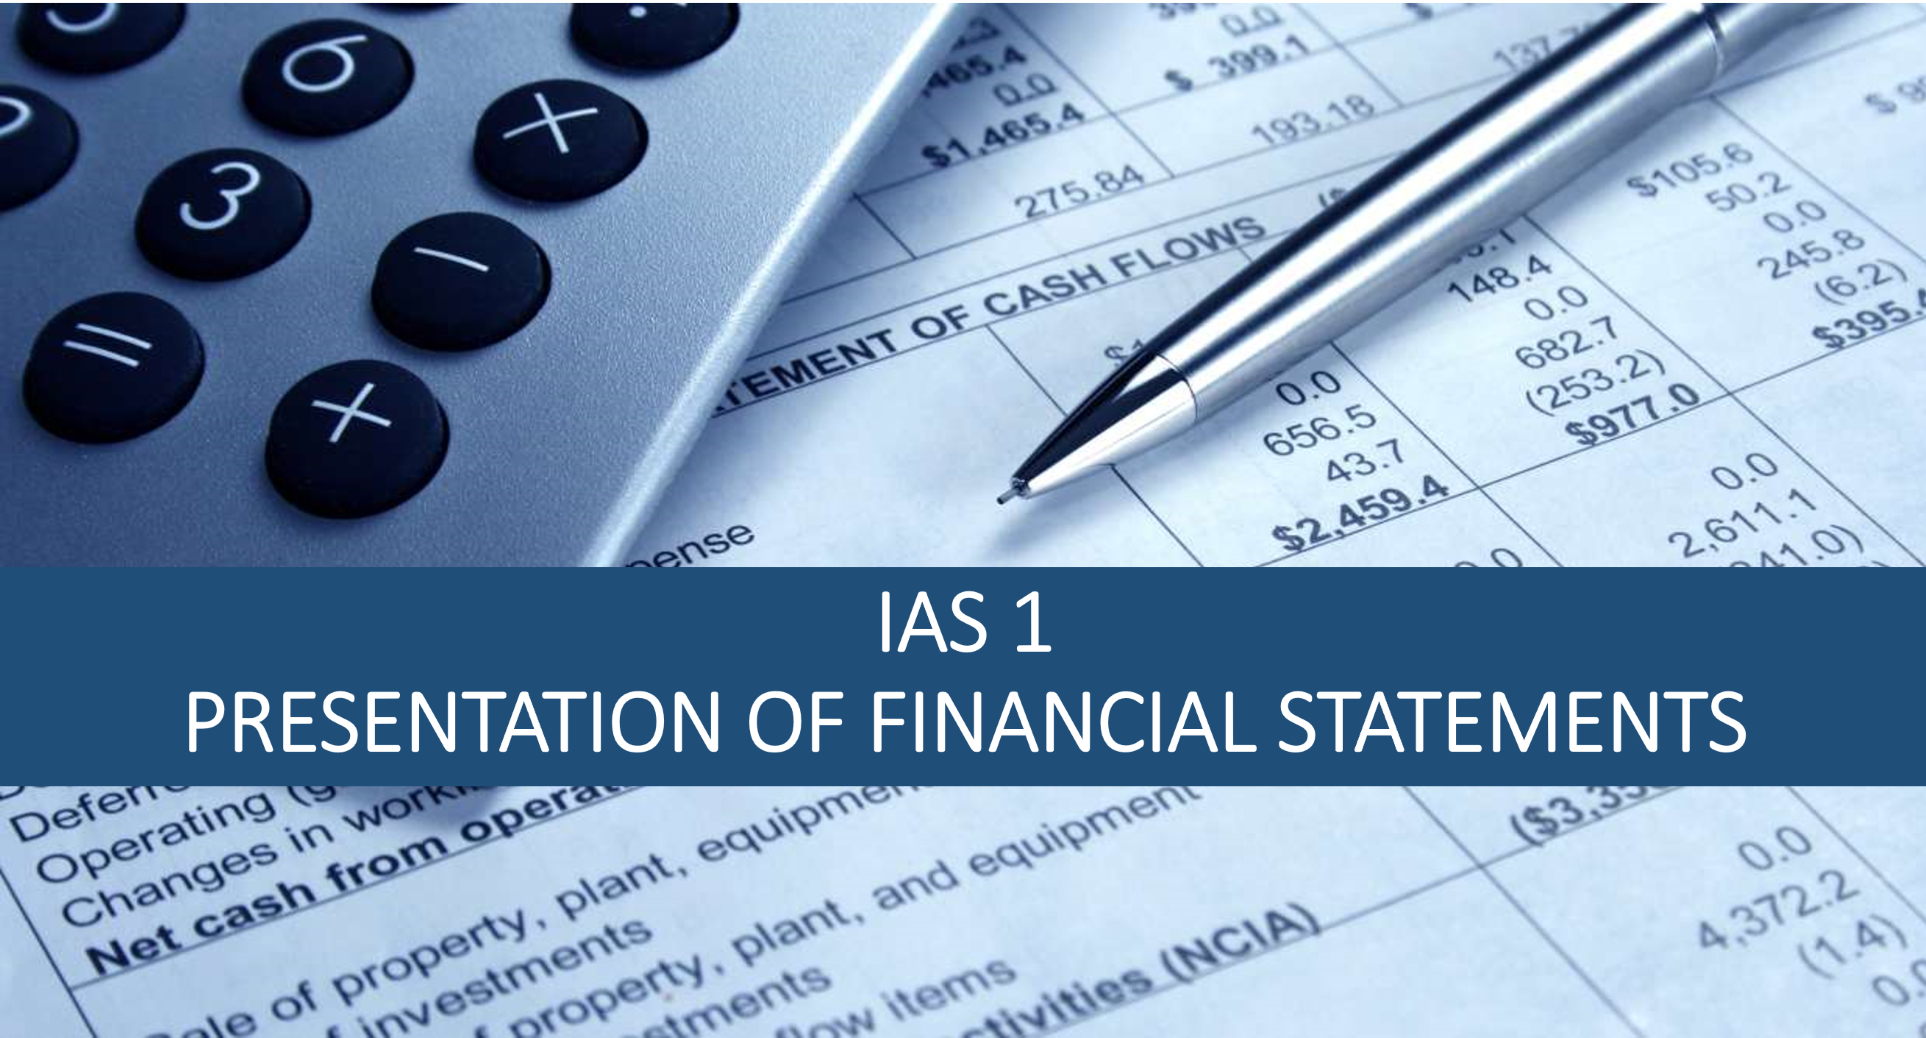 ias 1 presentation of financial statements going concern